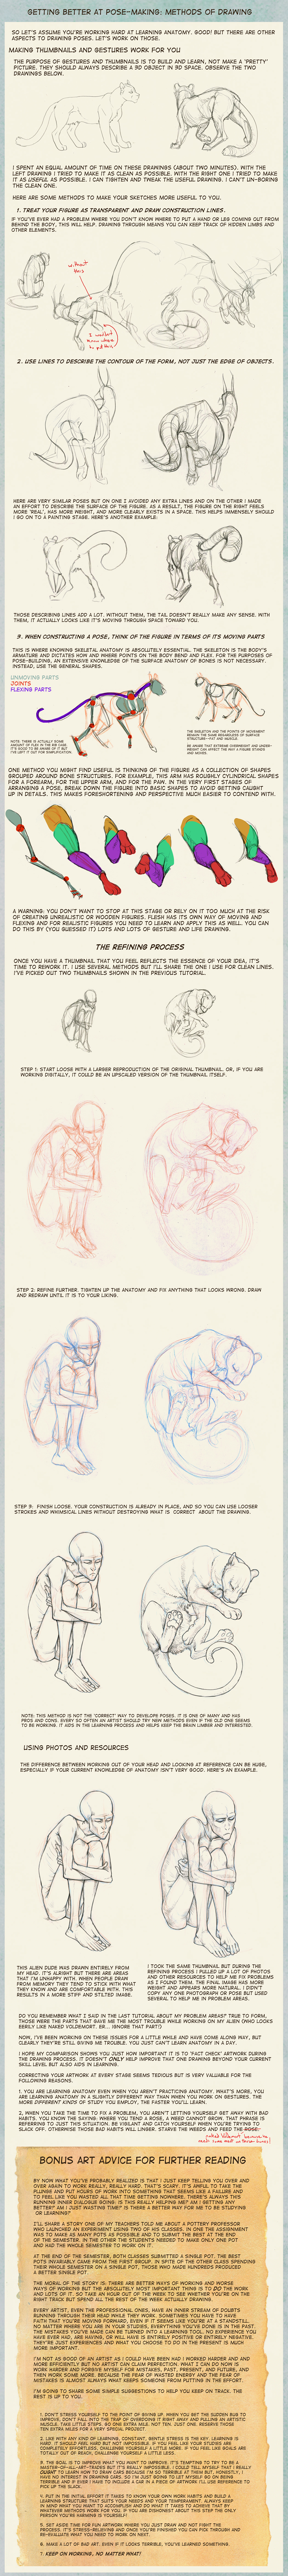 Poses: methods of drawing